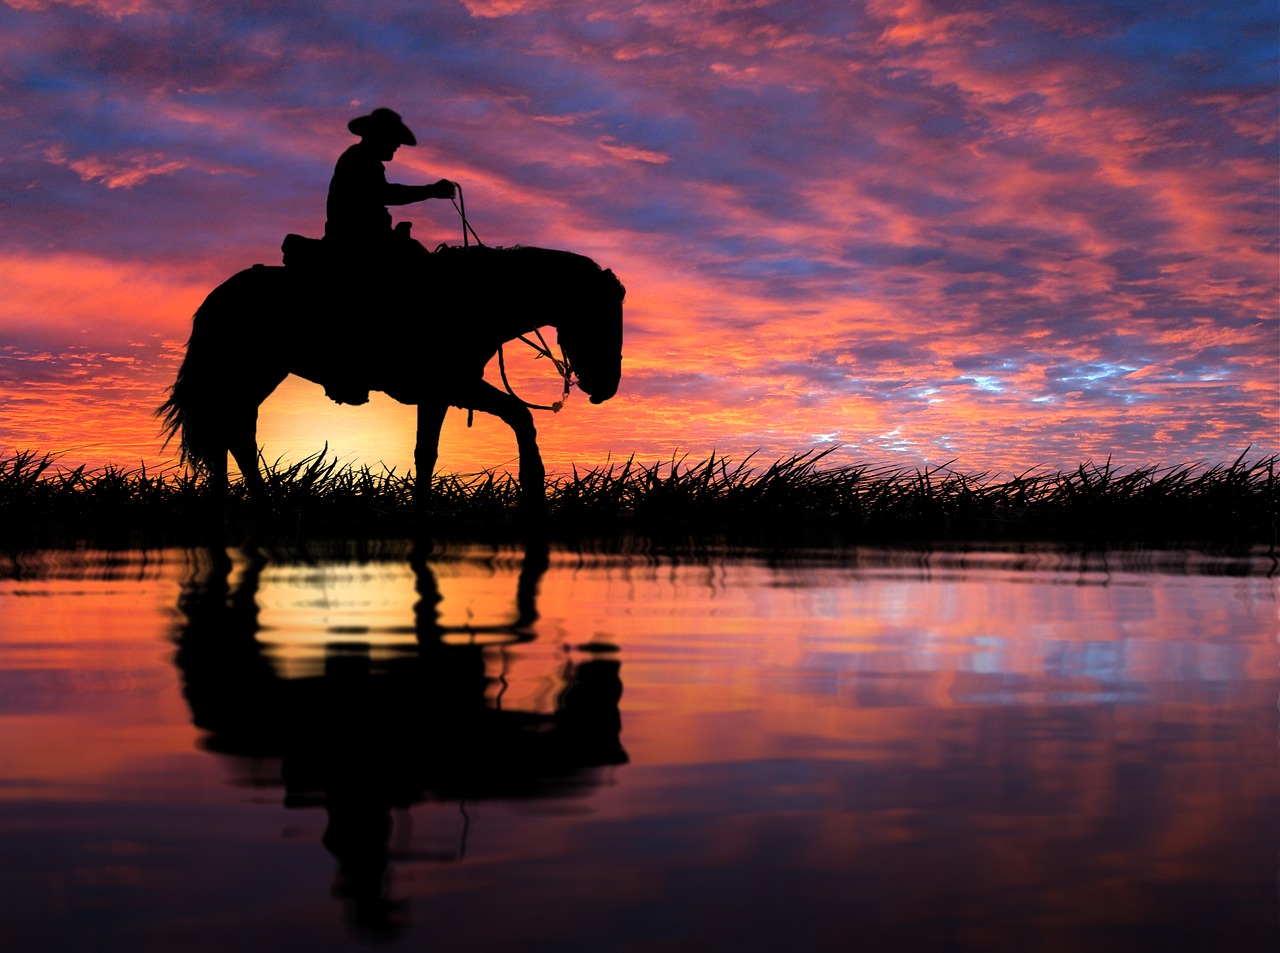 a silhouette of a man riding a horse in a body of water